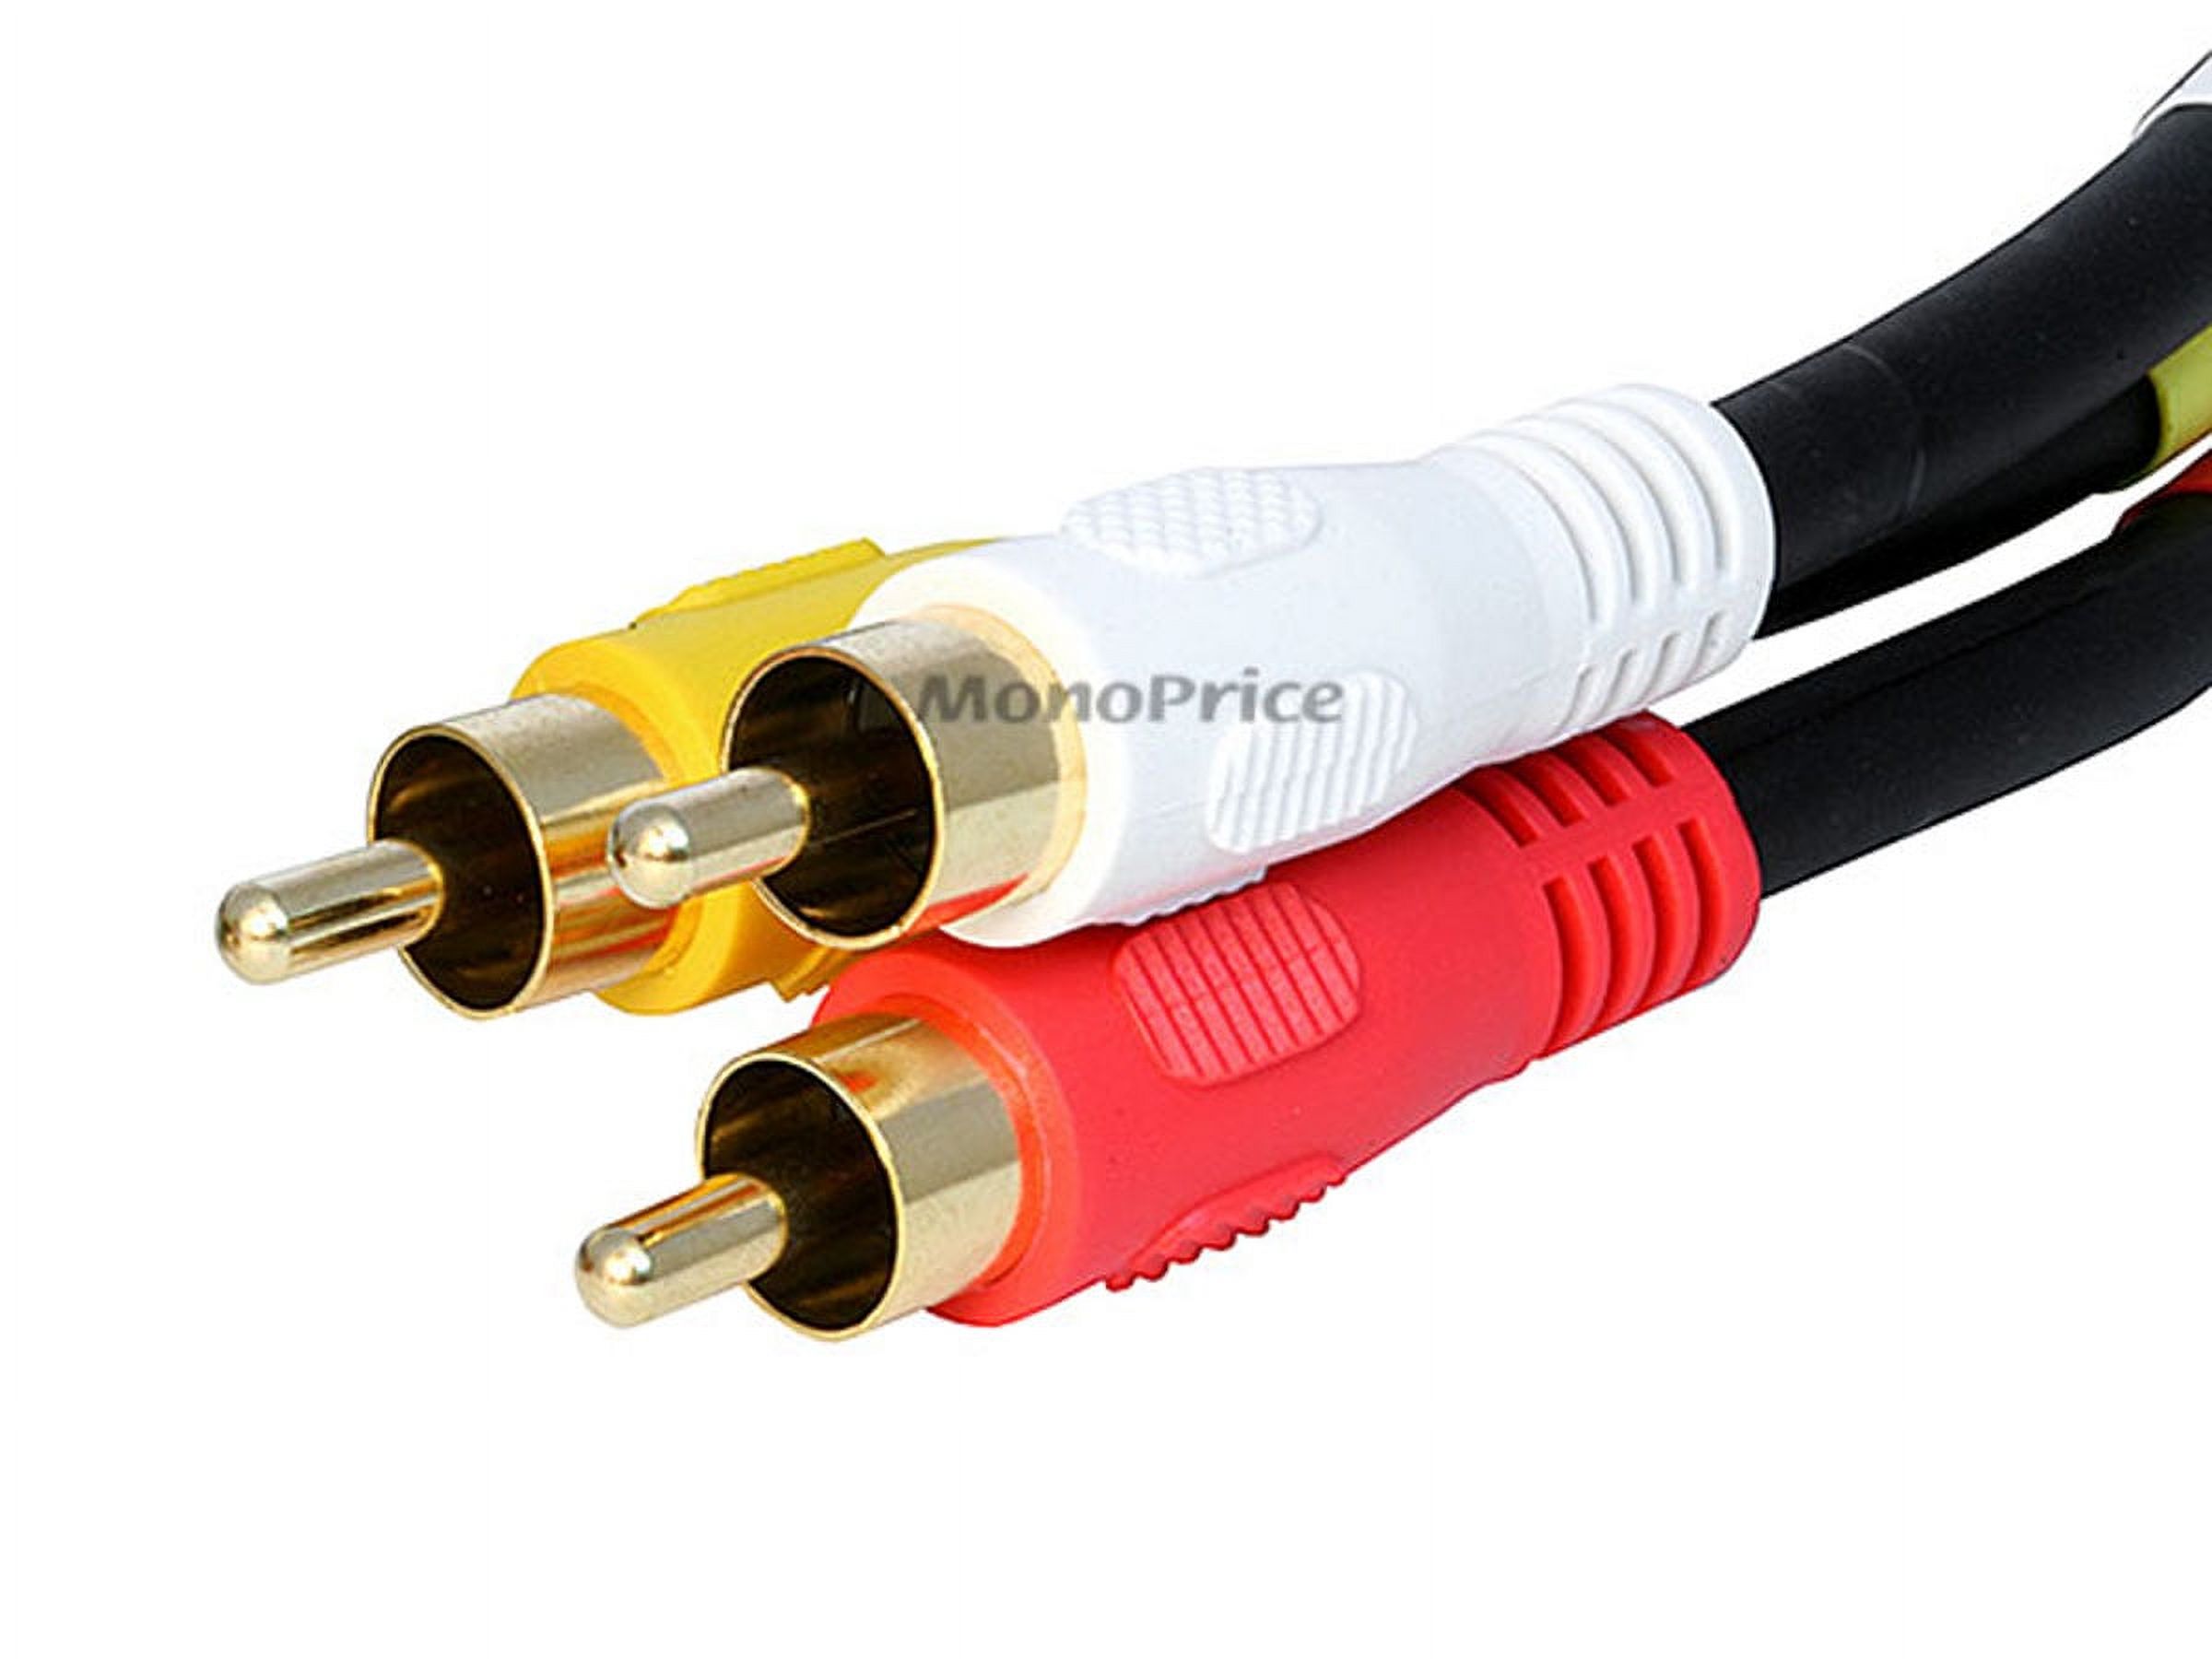 Monoprice Video Cable - 1.5 Feet - Black | Triple RCA Stereo Video Dubbing Composite Cable, Gold Plated Connectors - image 2 of 2